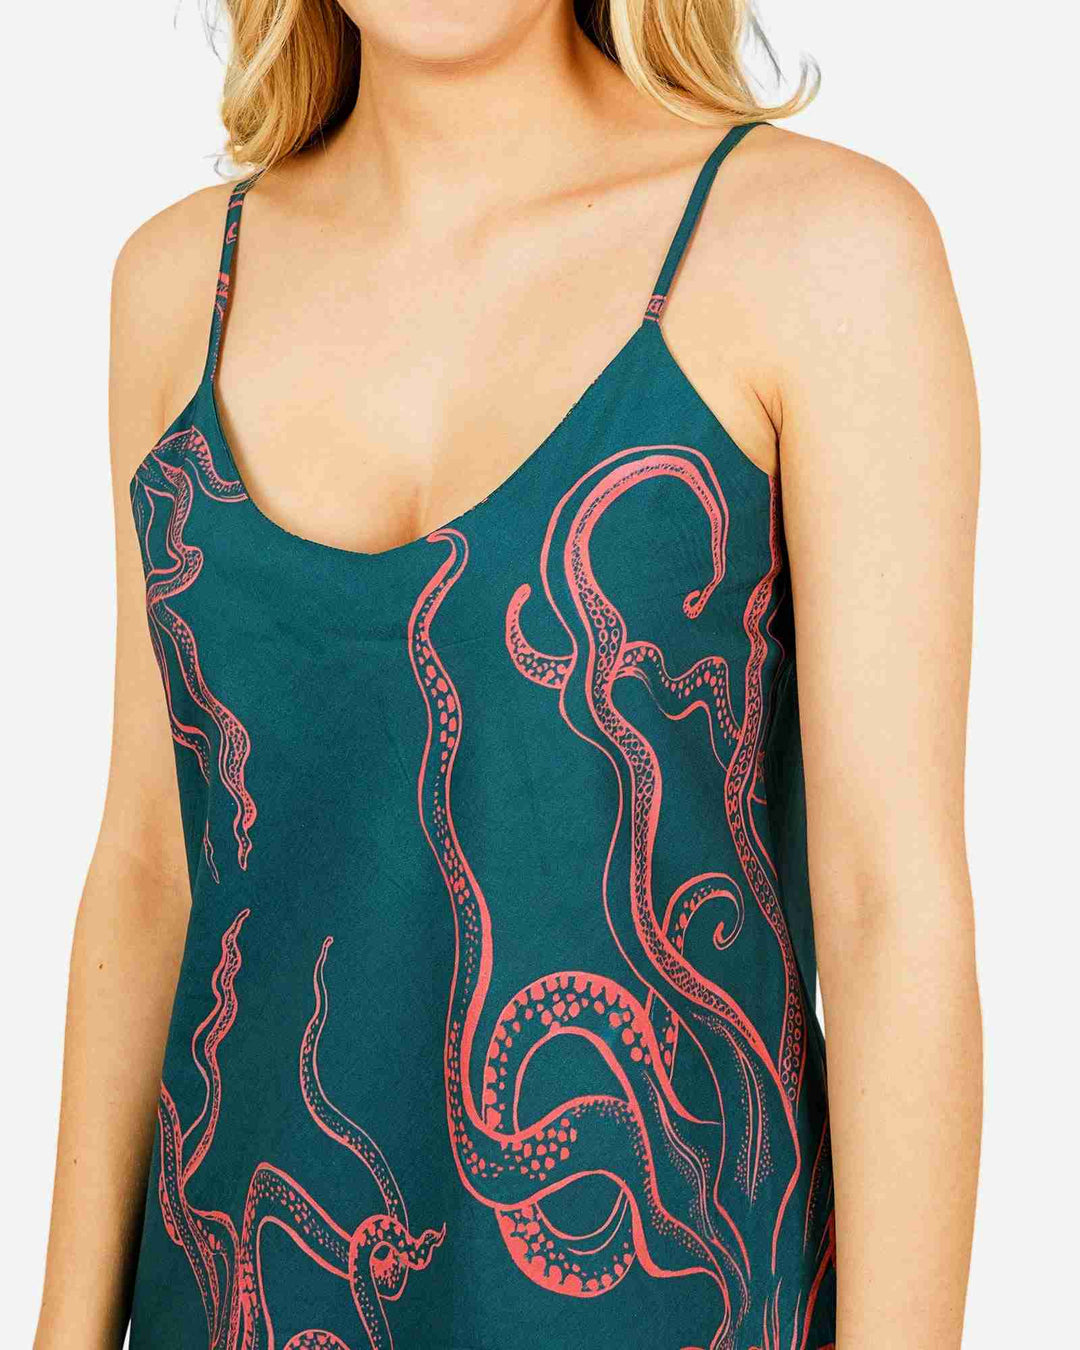 Womens sexy cotton nighty - Octopus pink on turquoise background